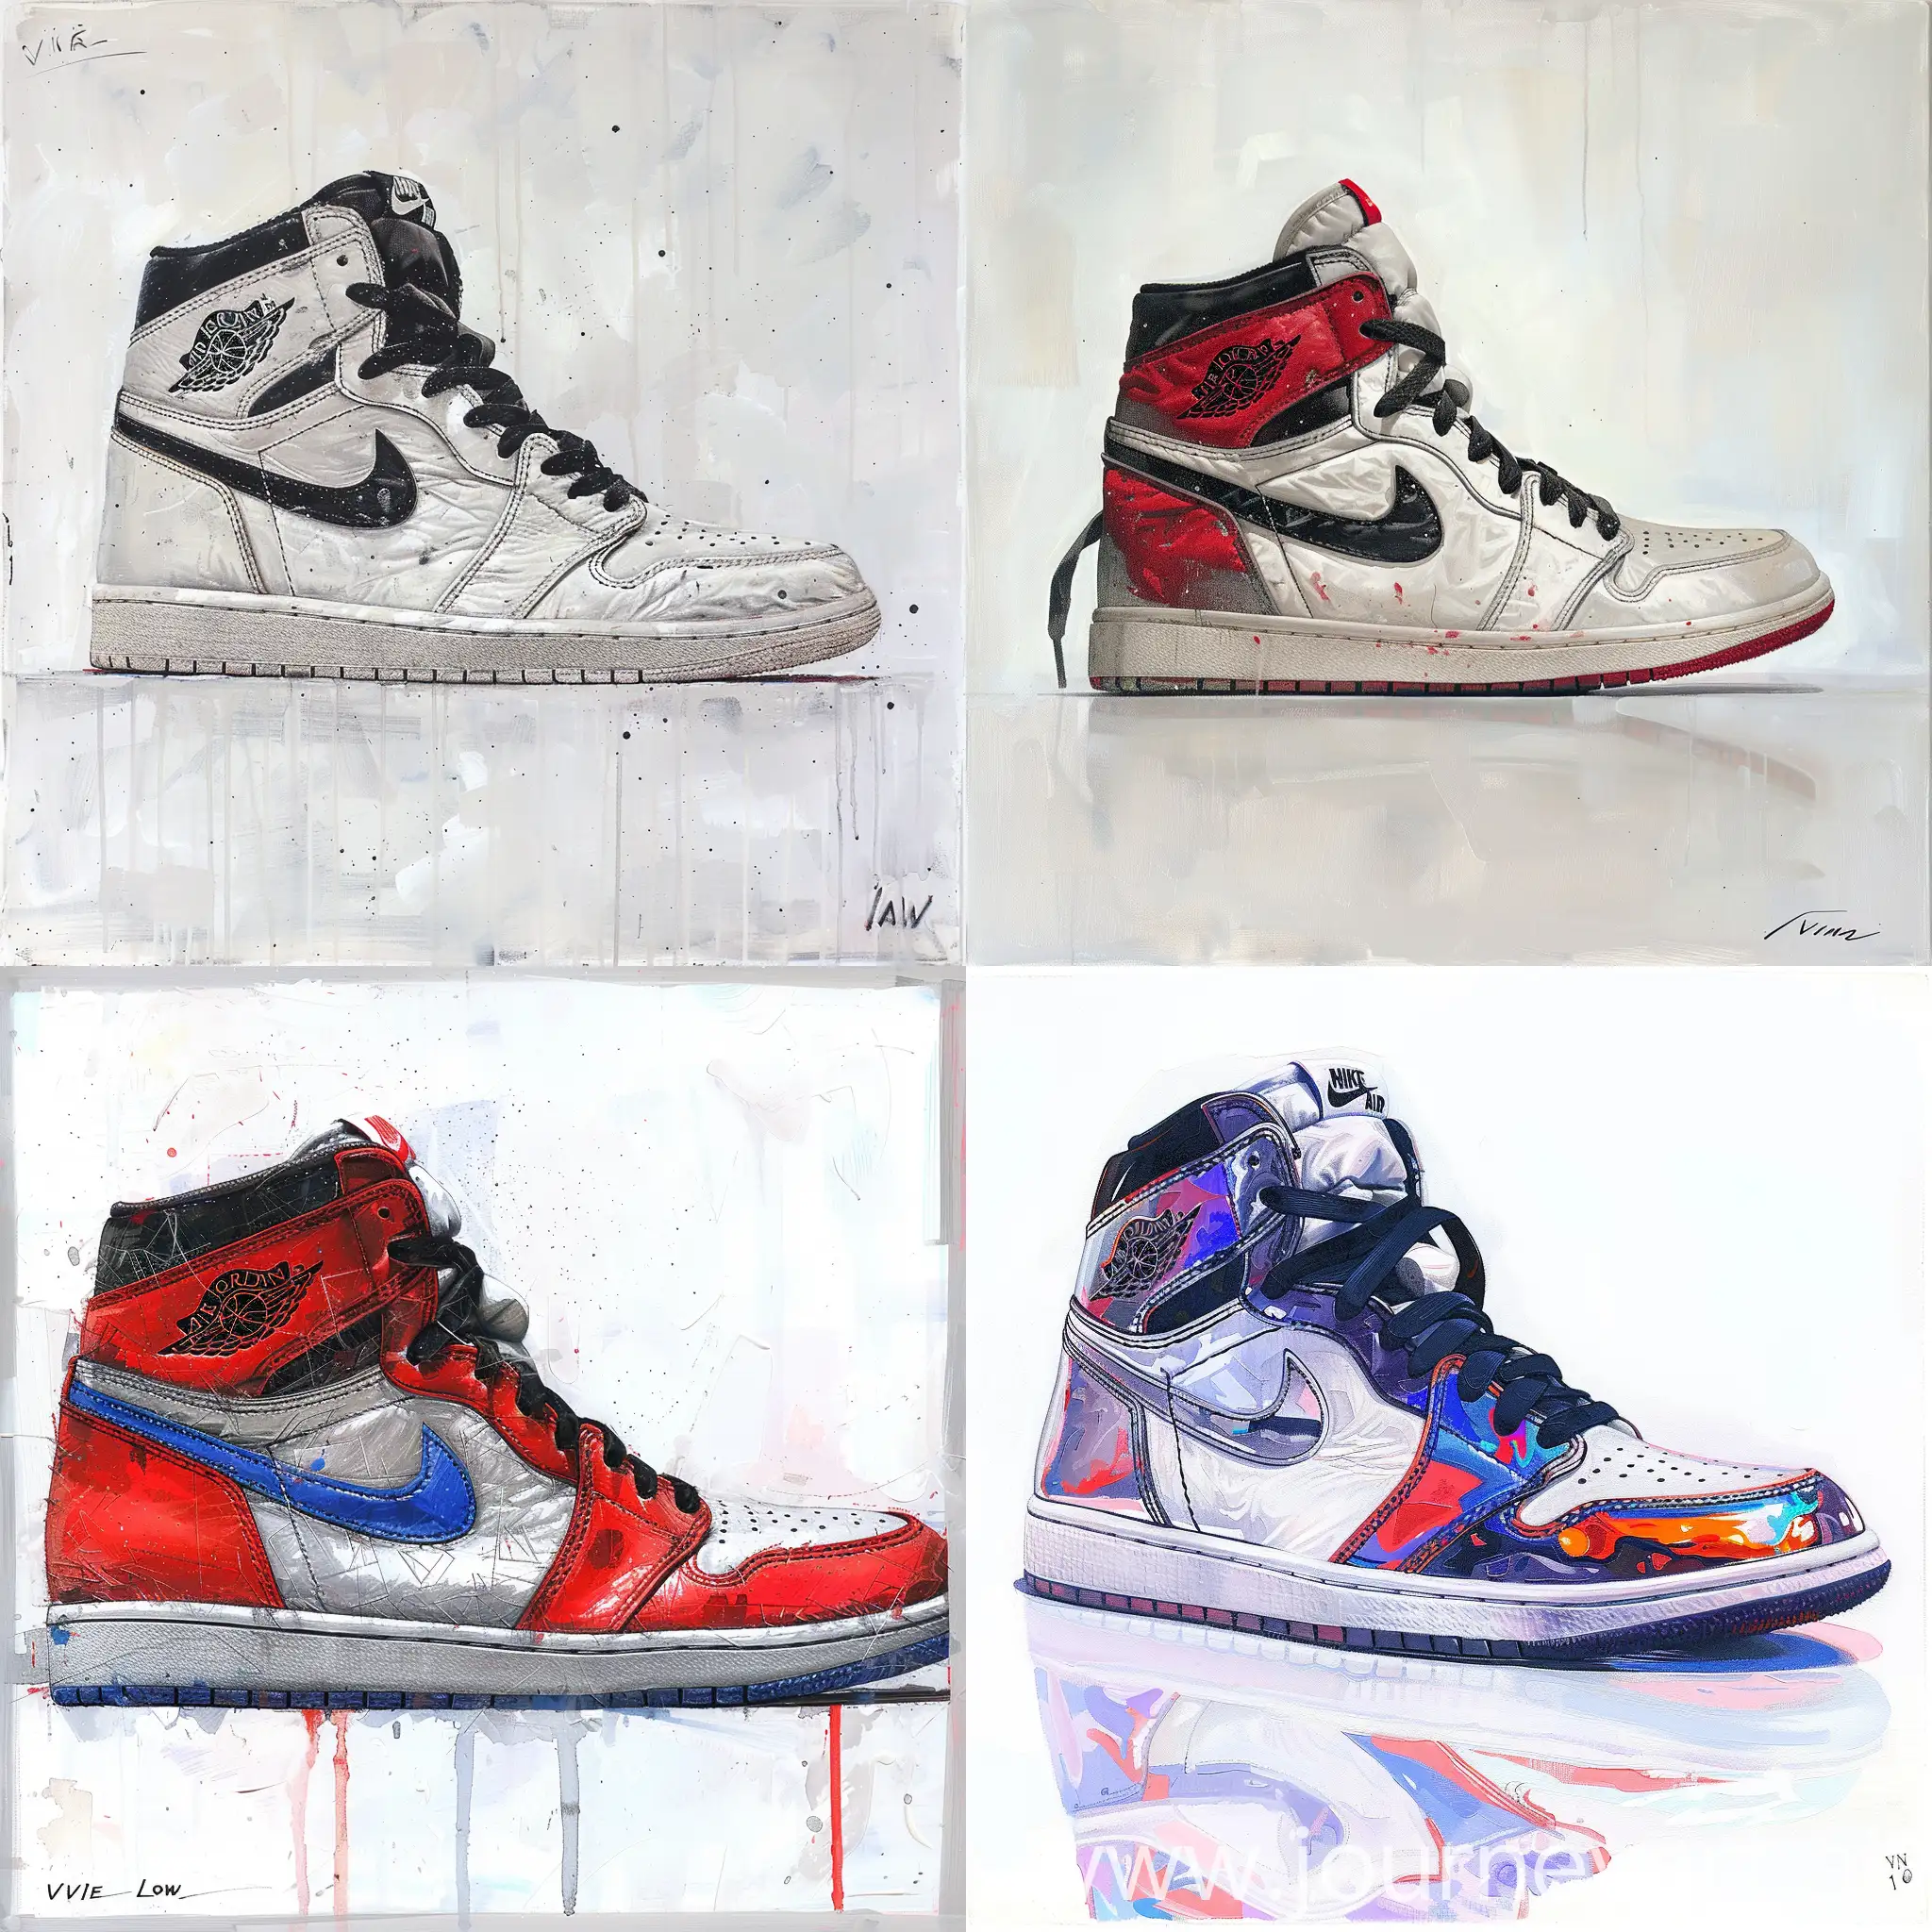 Painting by Vince Low about a Nike air Jordan 1, white background